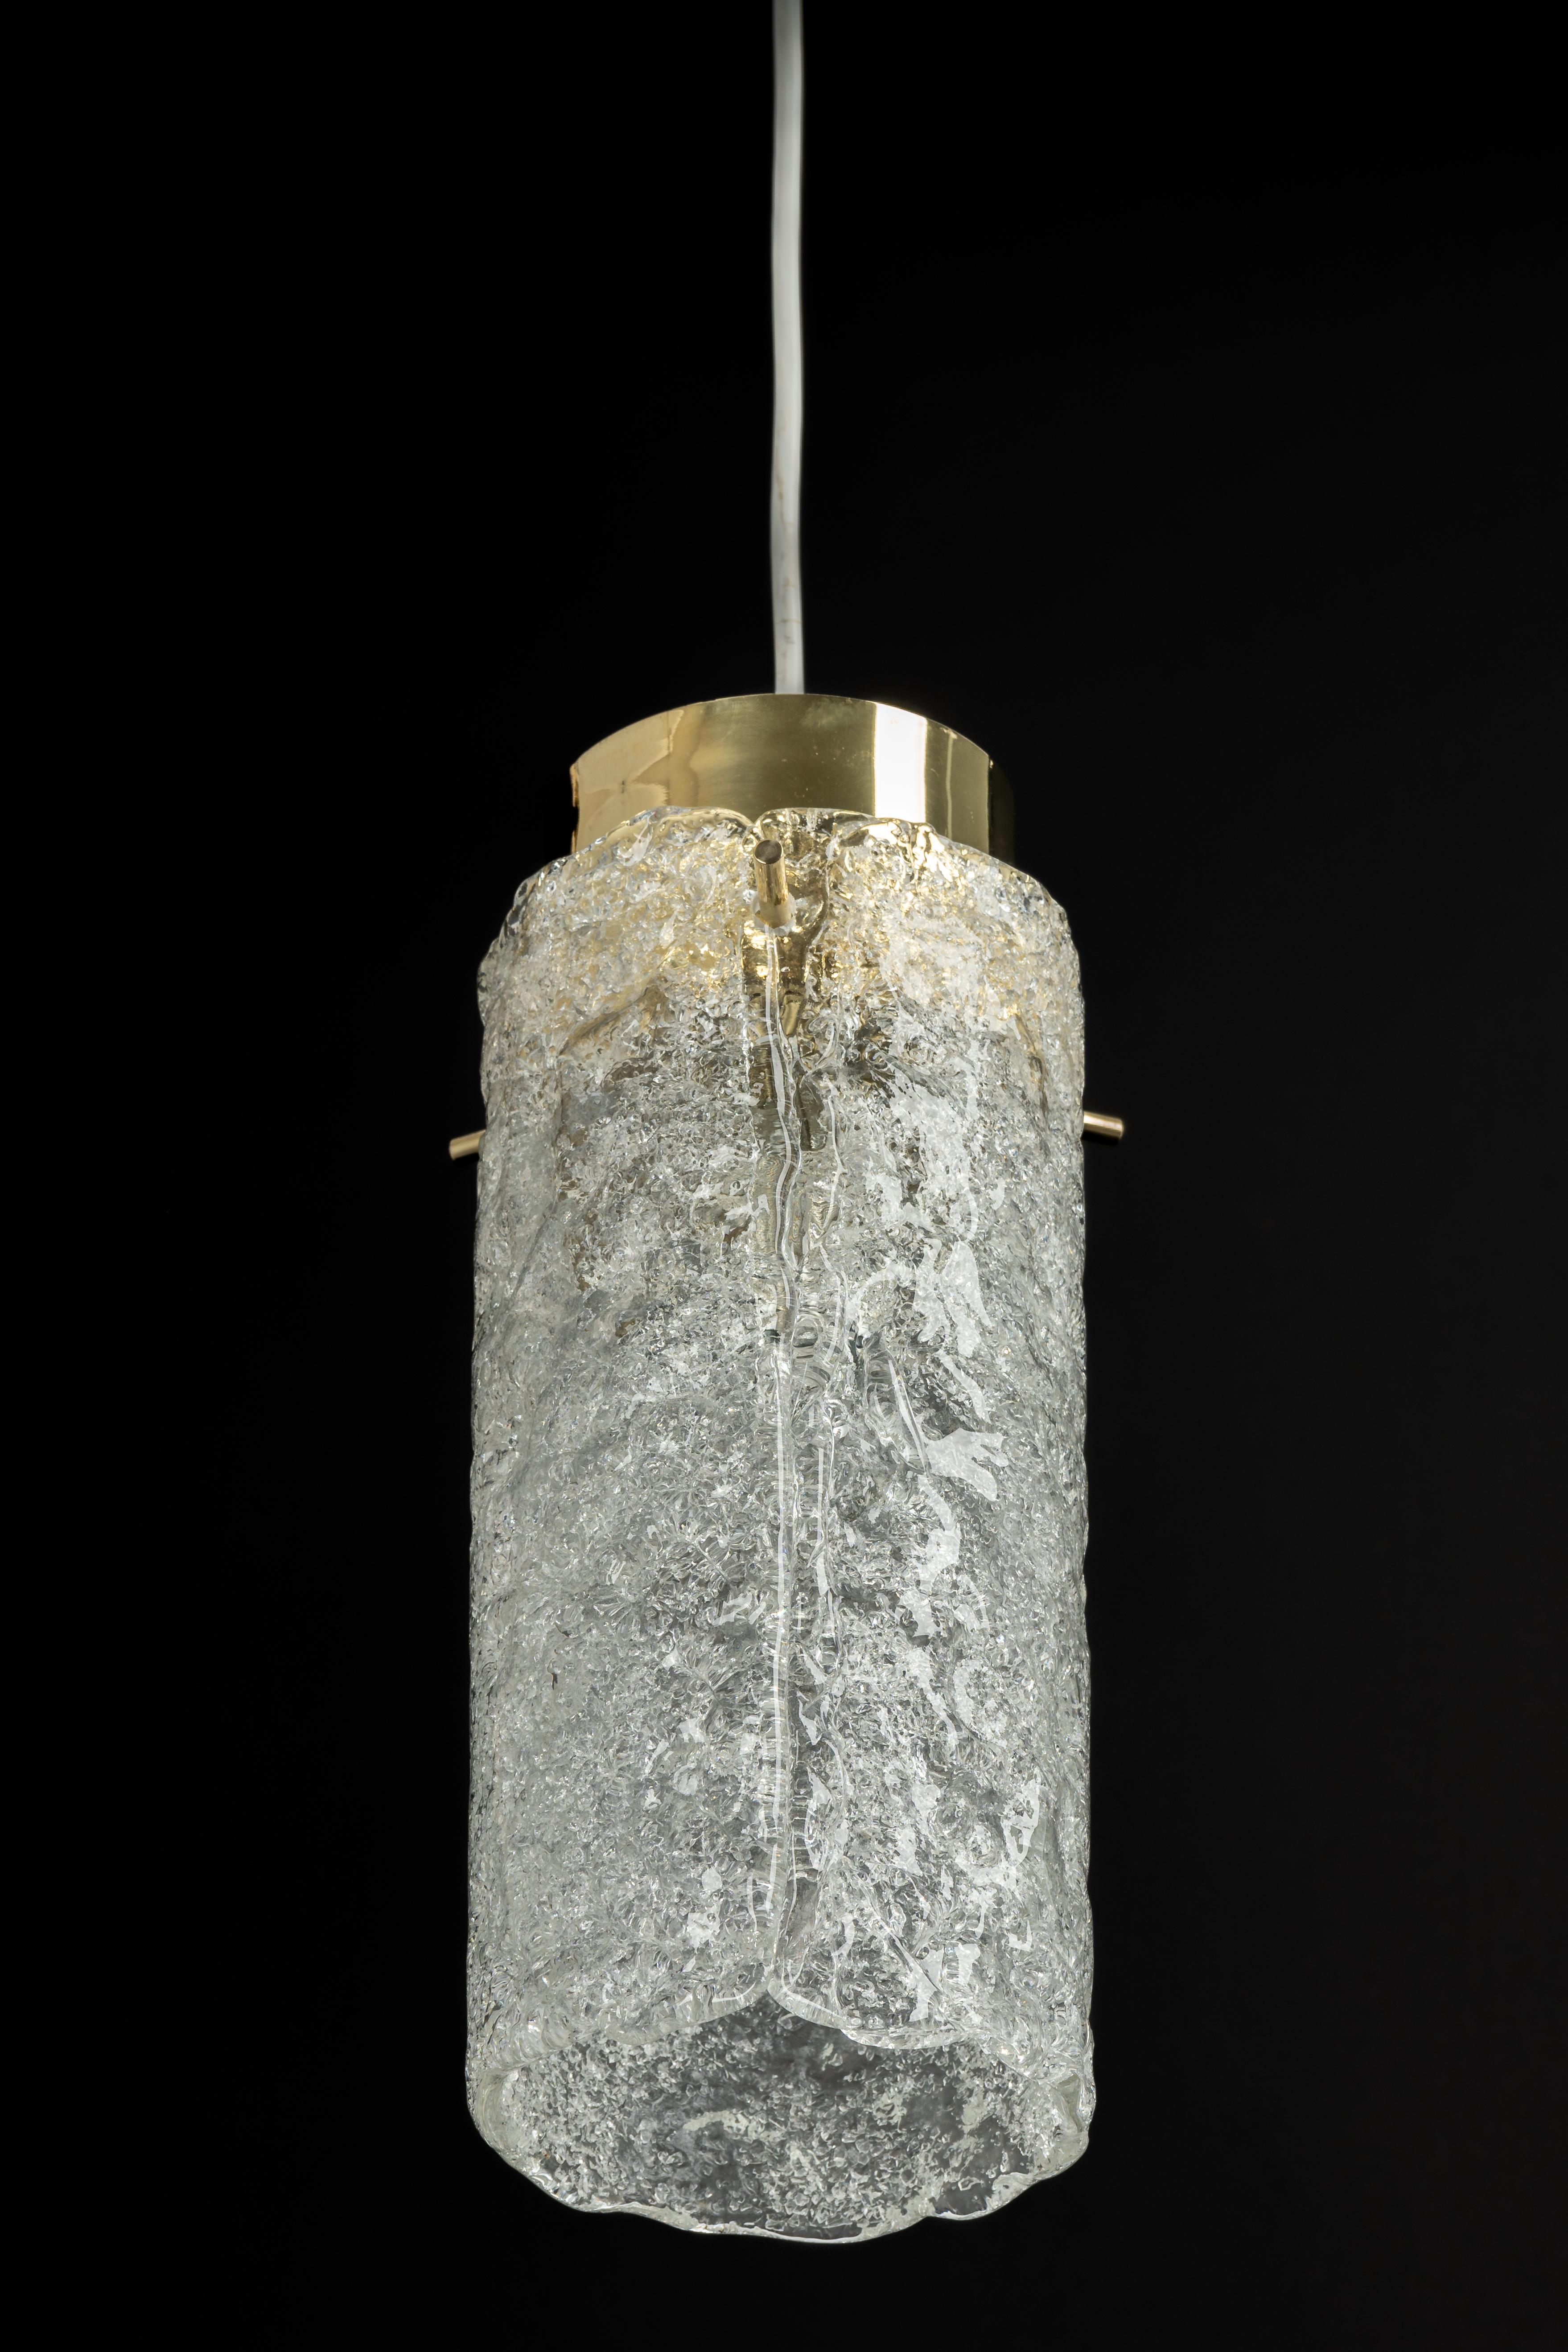 Austrian 1 of 2 Petite Murano Pendant Lights by Hillebrand, 1960s For Sale